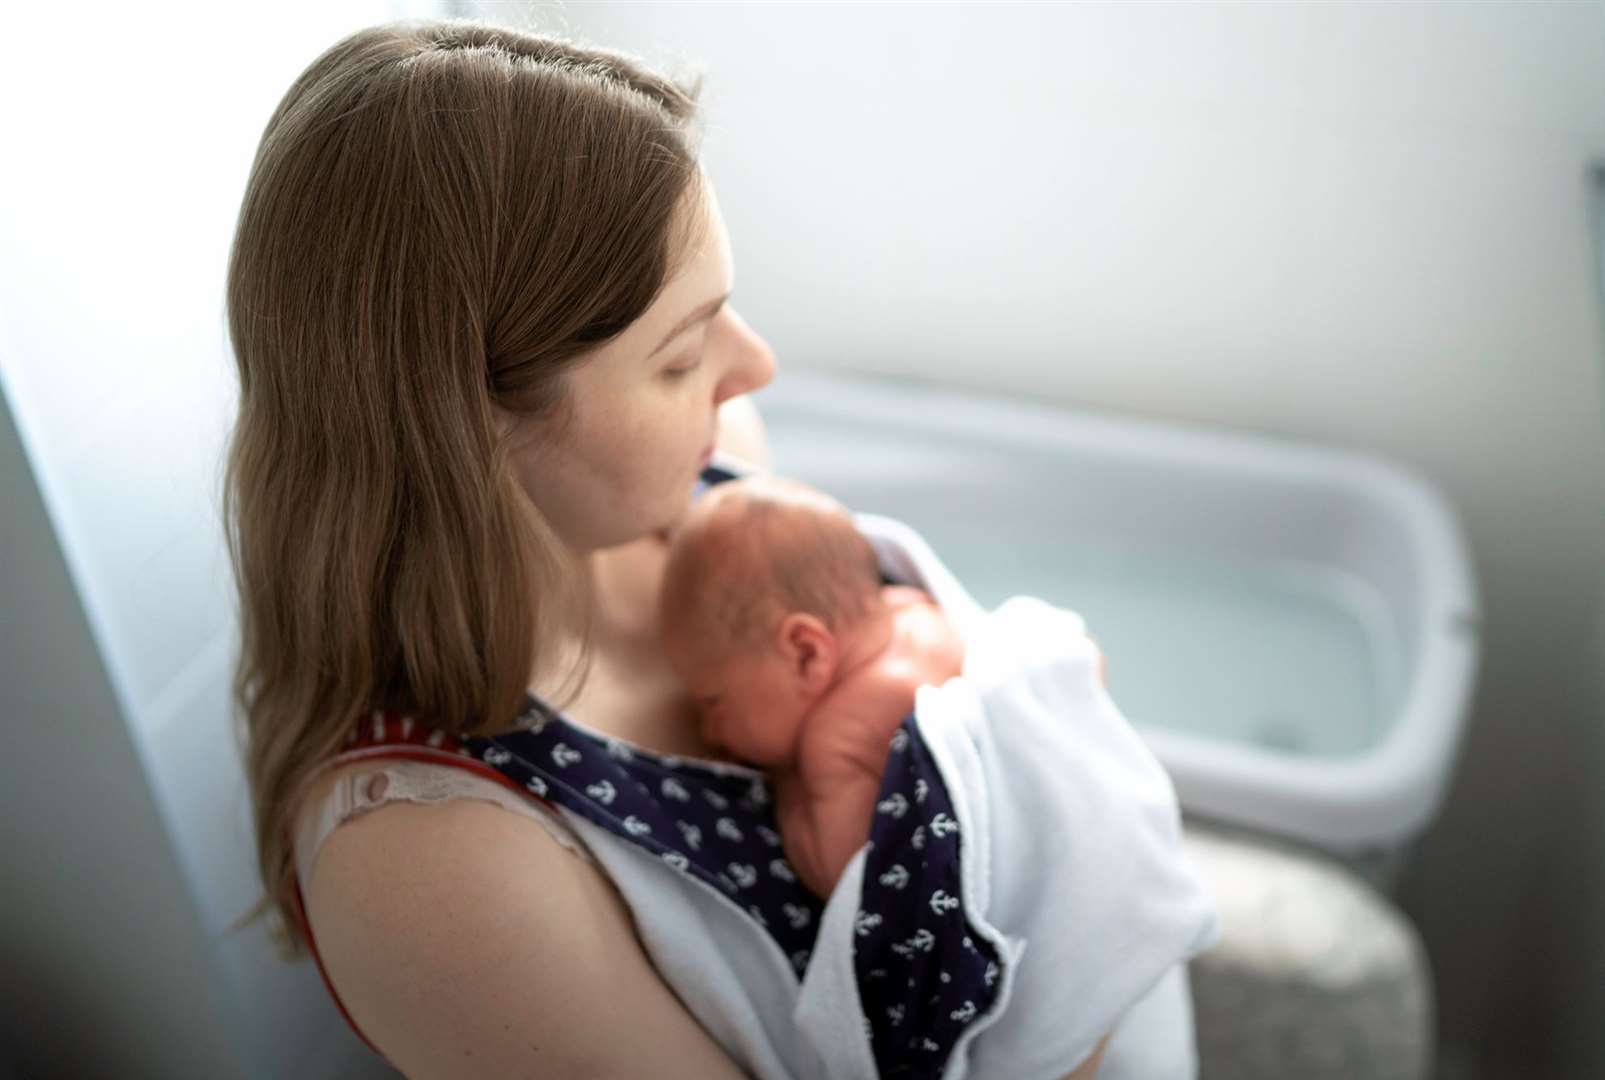 The jab will protect babies during their early weeks of life. Image: iStock.